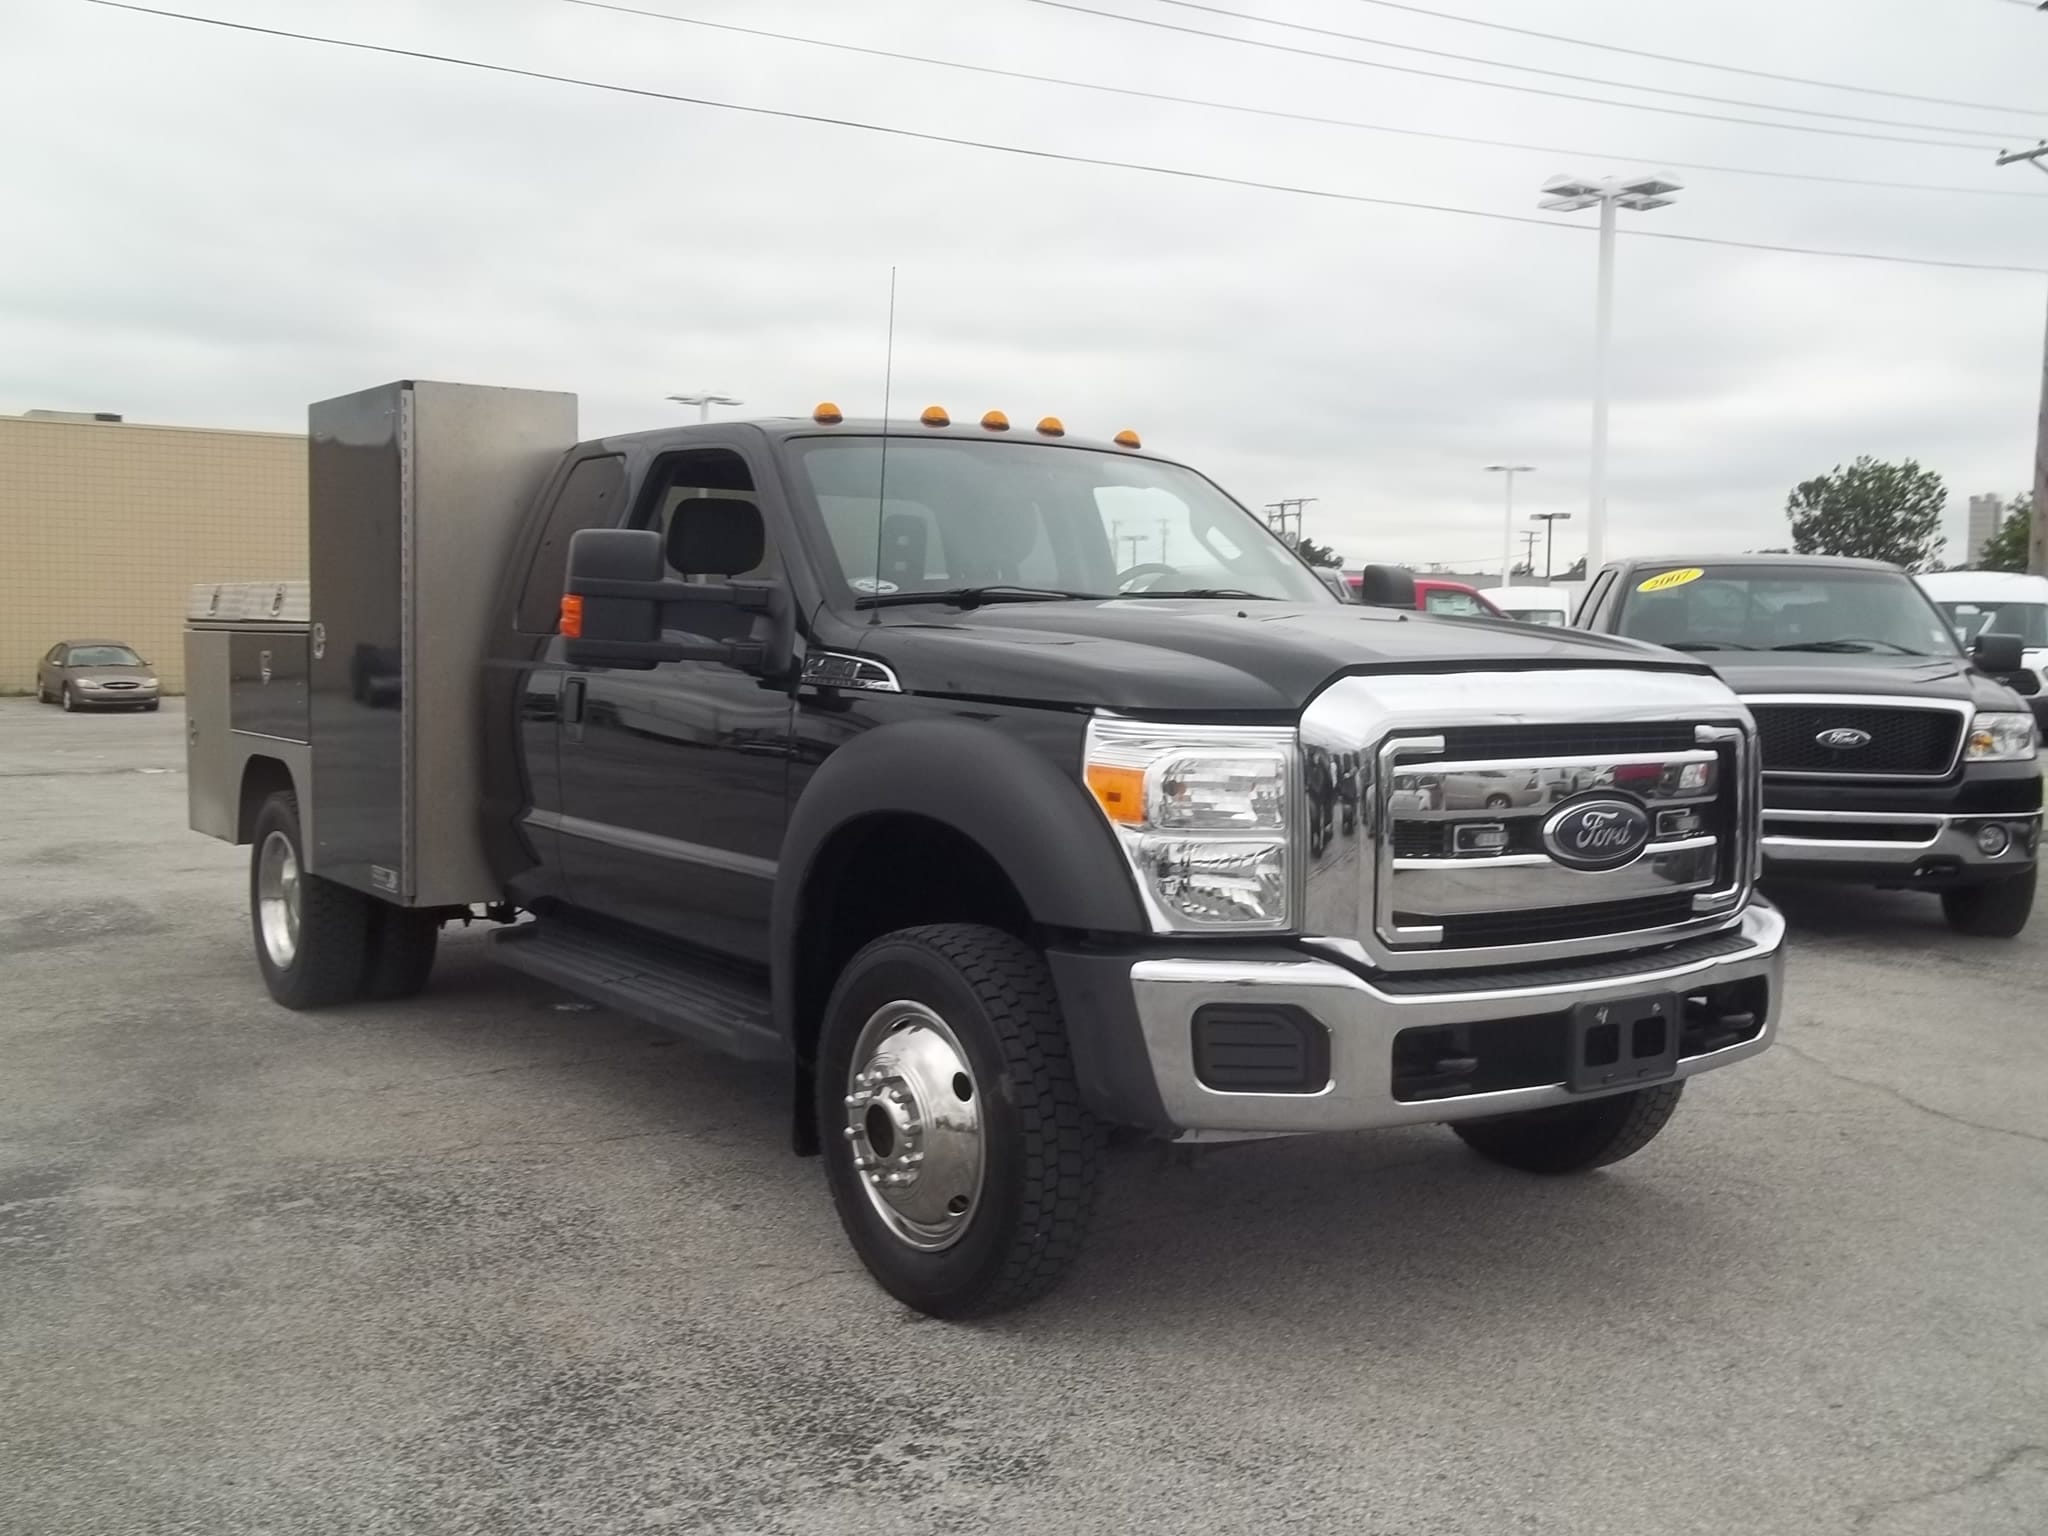 Used 2014 Ford F-450 Chassis Cab For Sale Fort Wayne IN |  VIN#1FD0X4HYXEEB23355